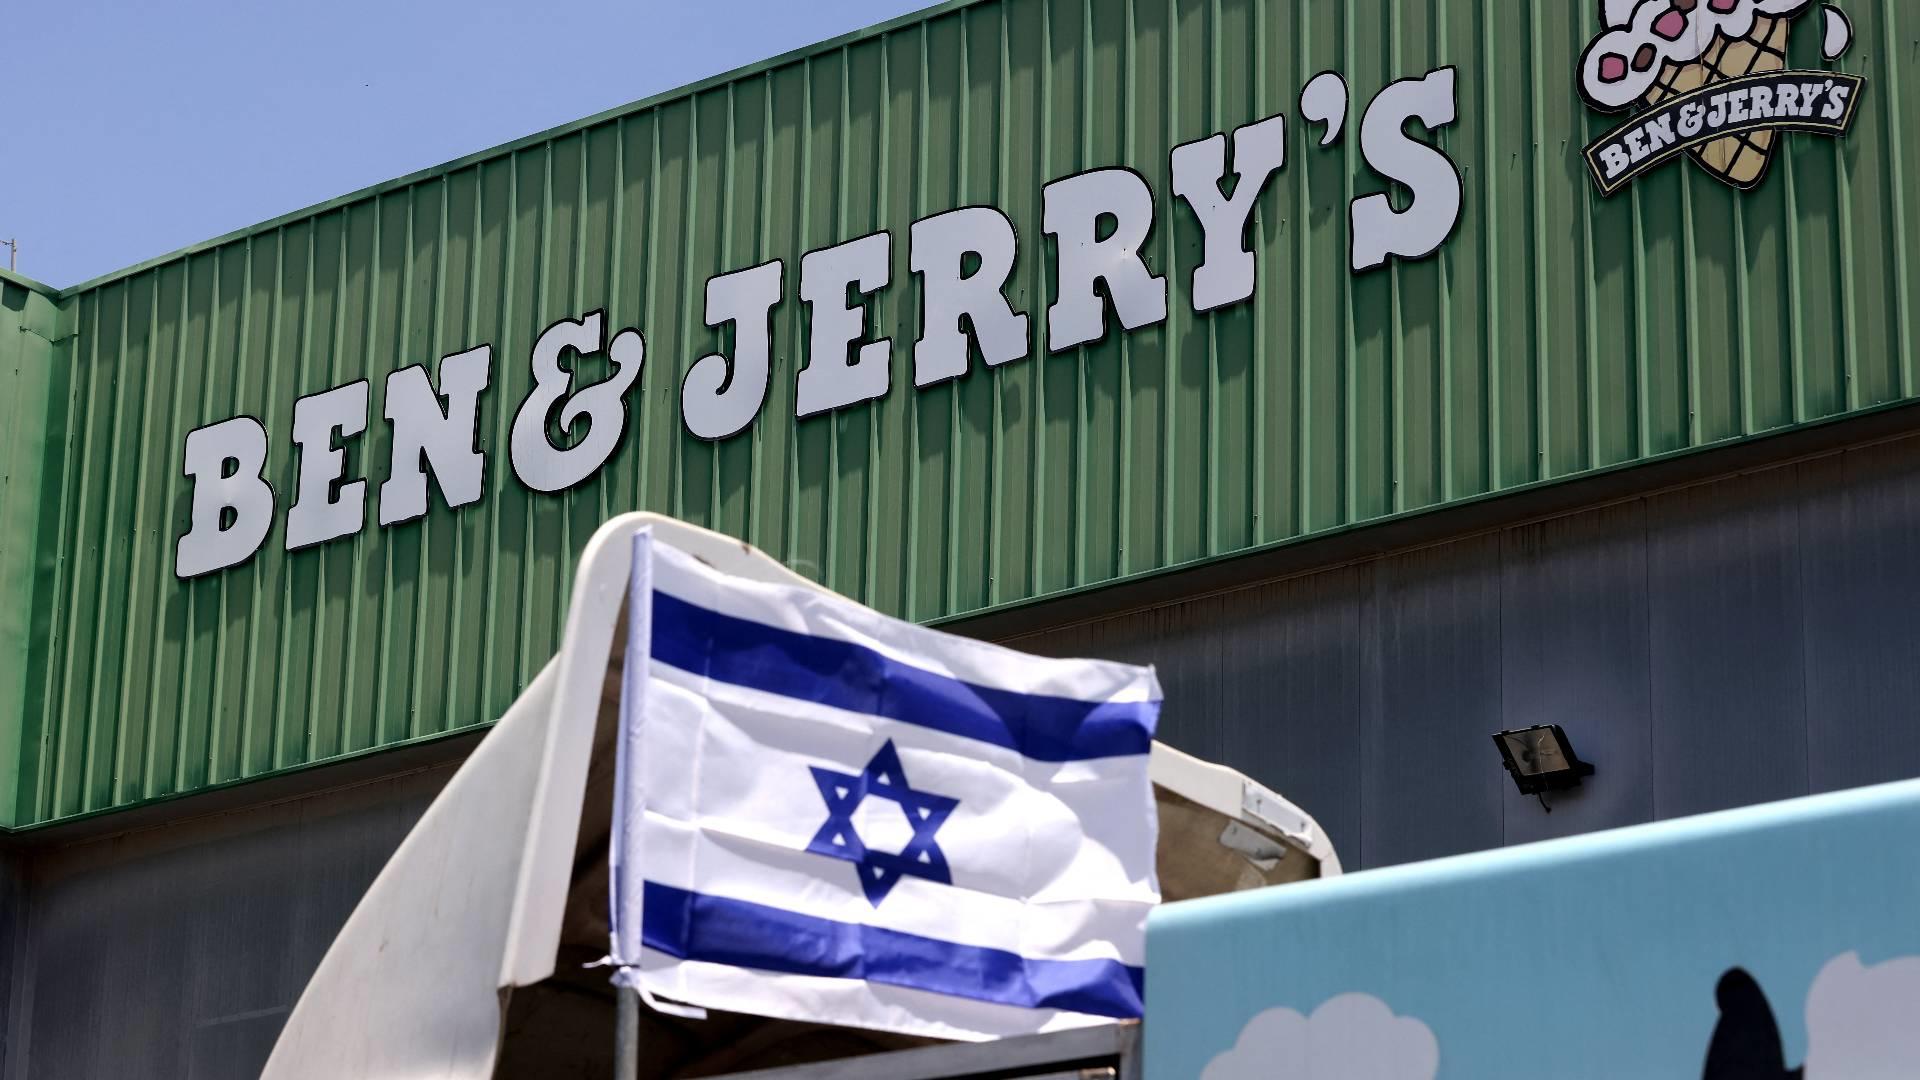 Last week, Unilever announced that it would be selling Ben & Jerry's business interests in Israel to Avi Zinger's American Quality Products, the current Israeli licencee of the ice cream brand.